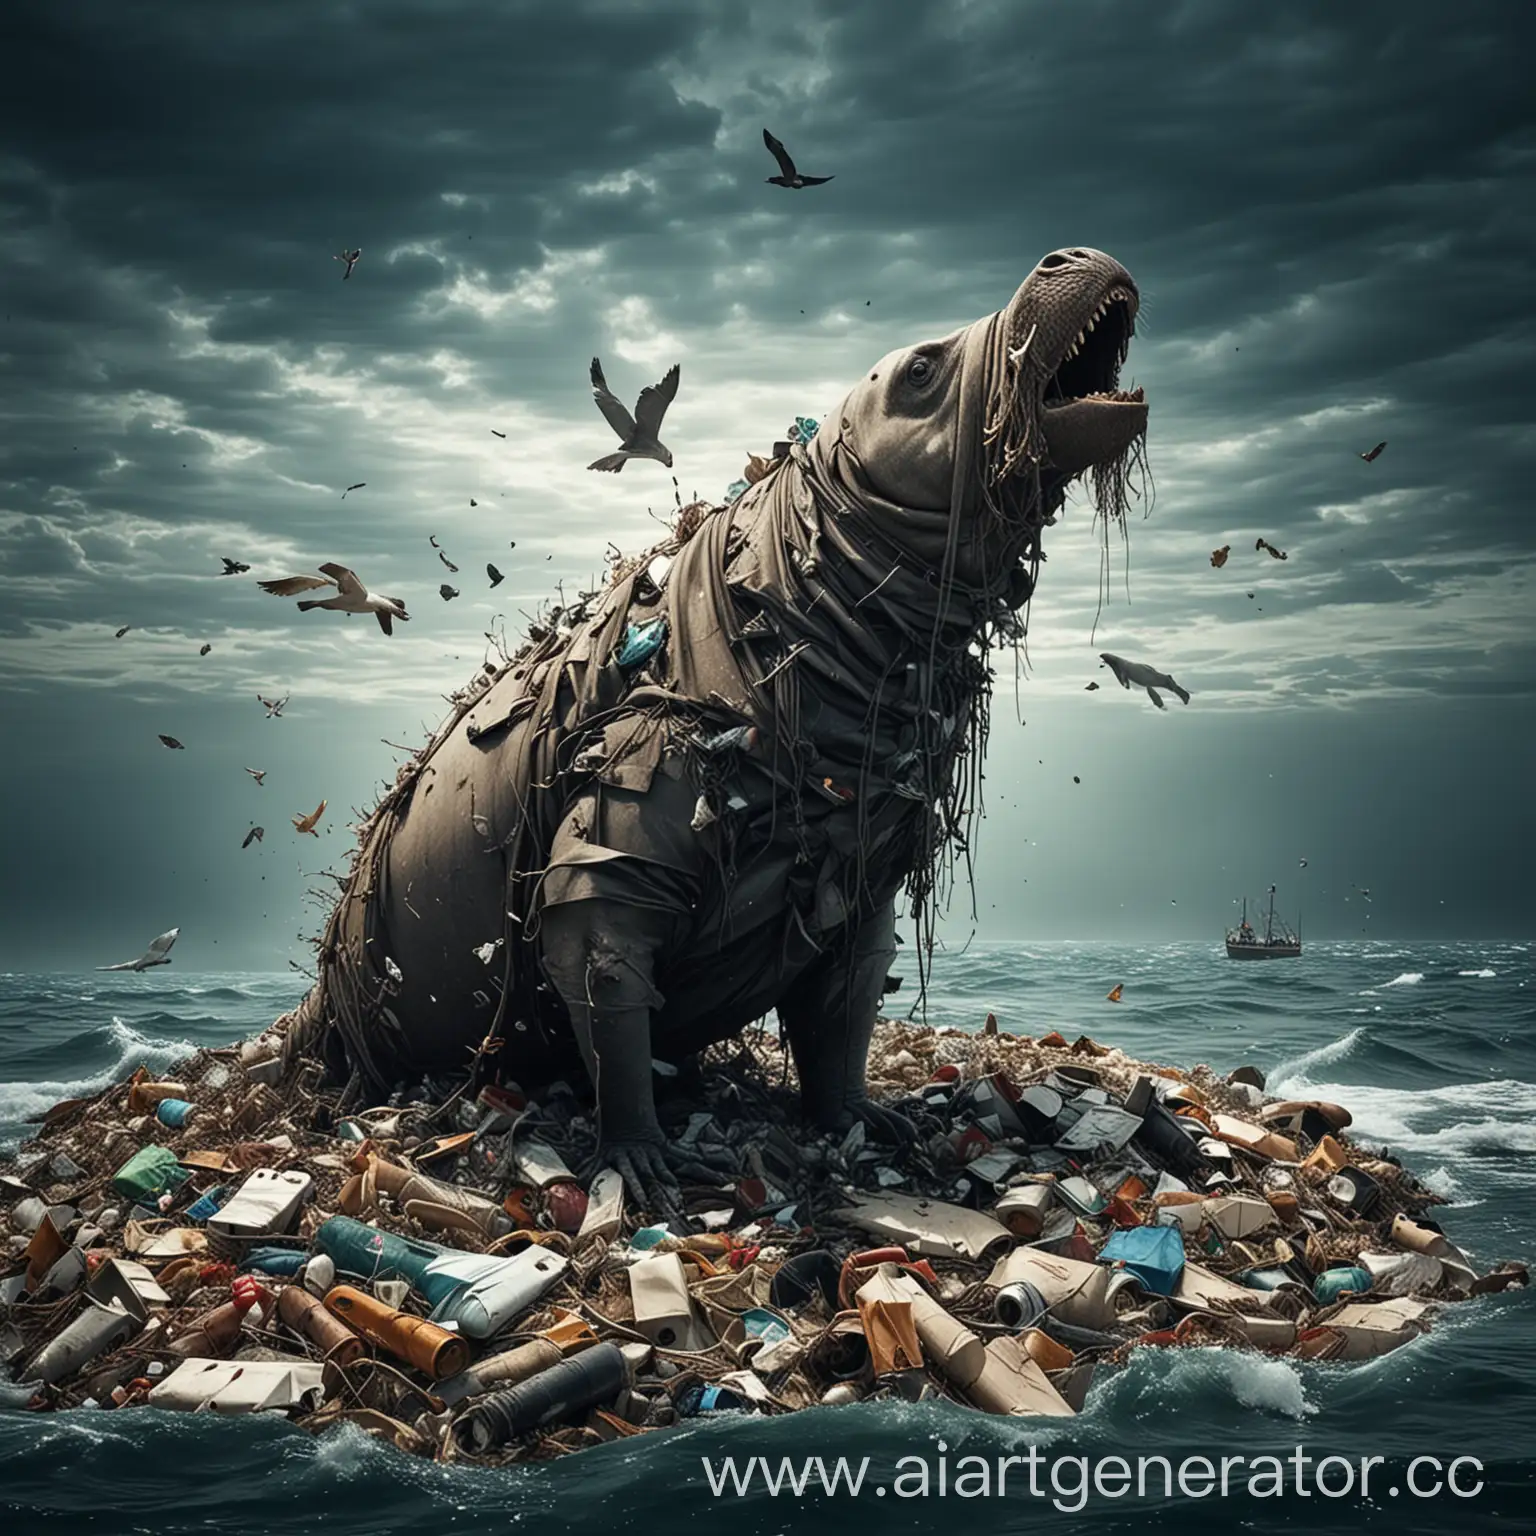 Horror-of-Ocean-Pollution-Animals-Suffering-from-Garbage